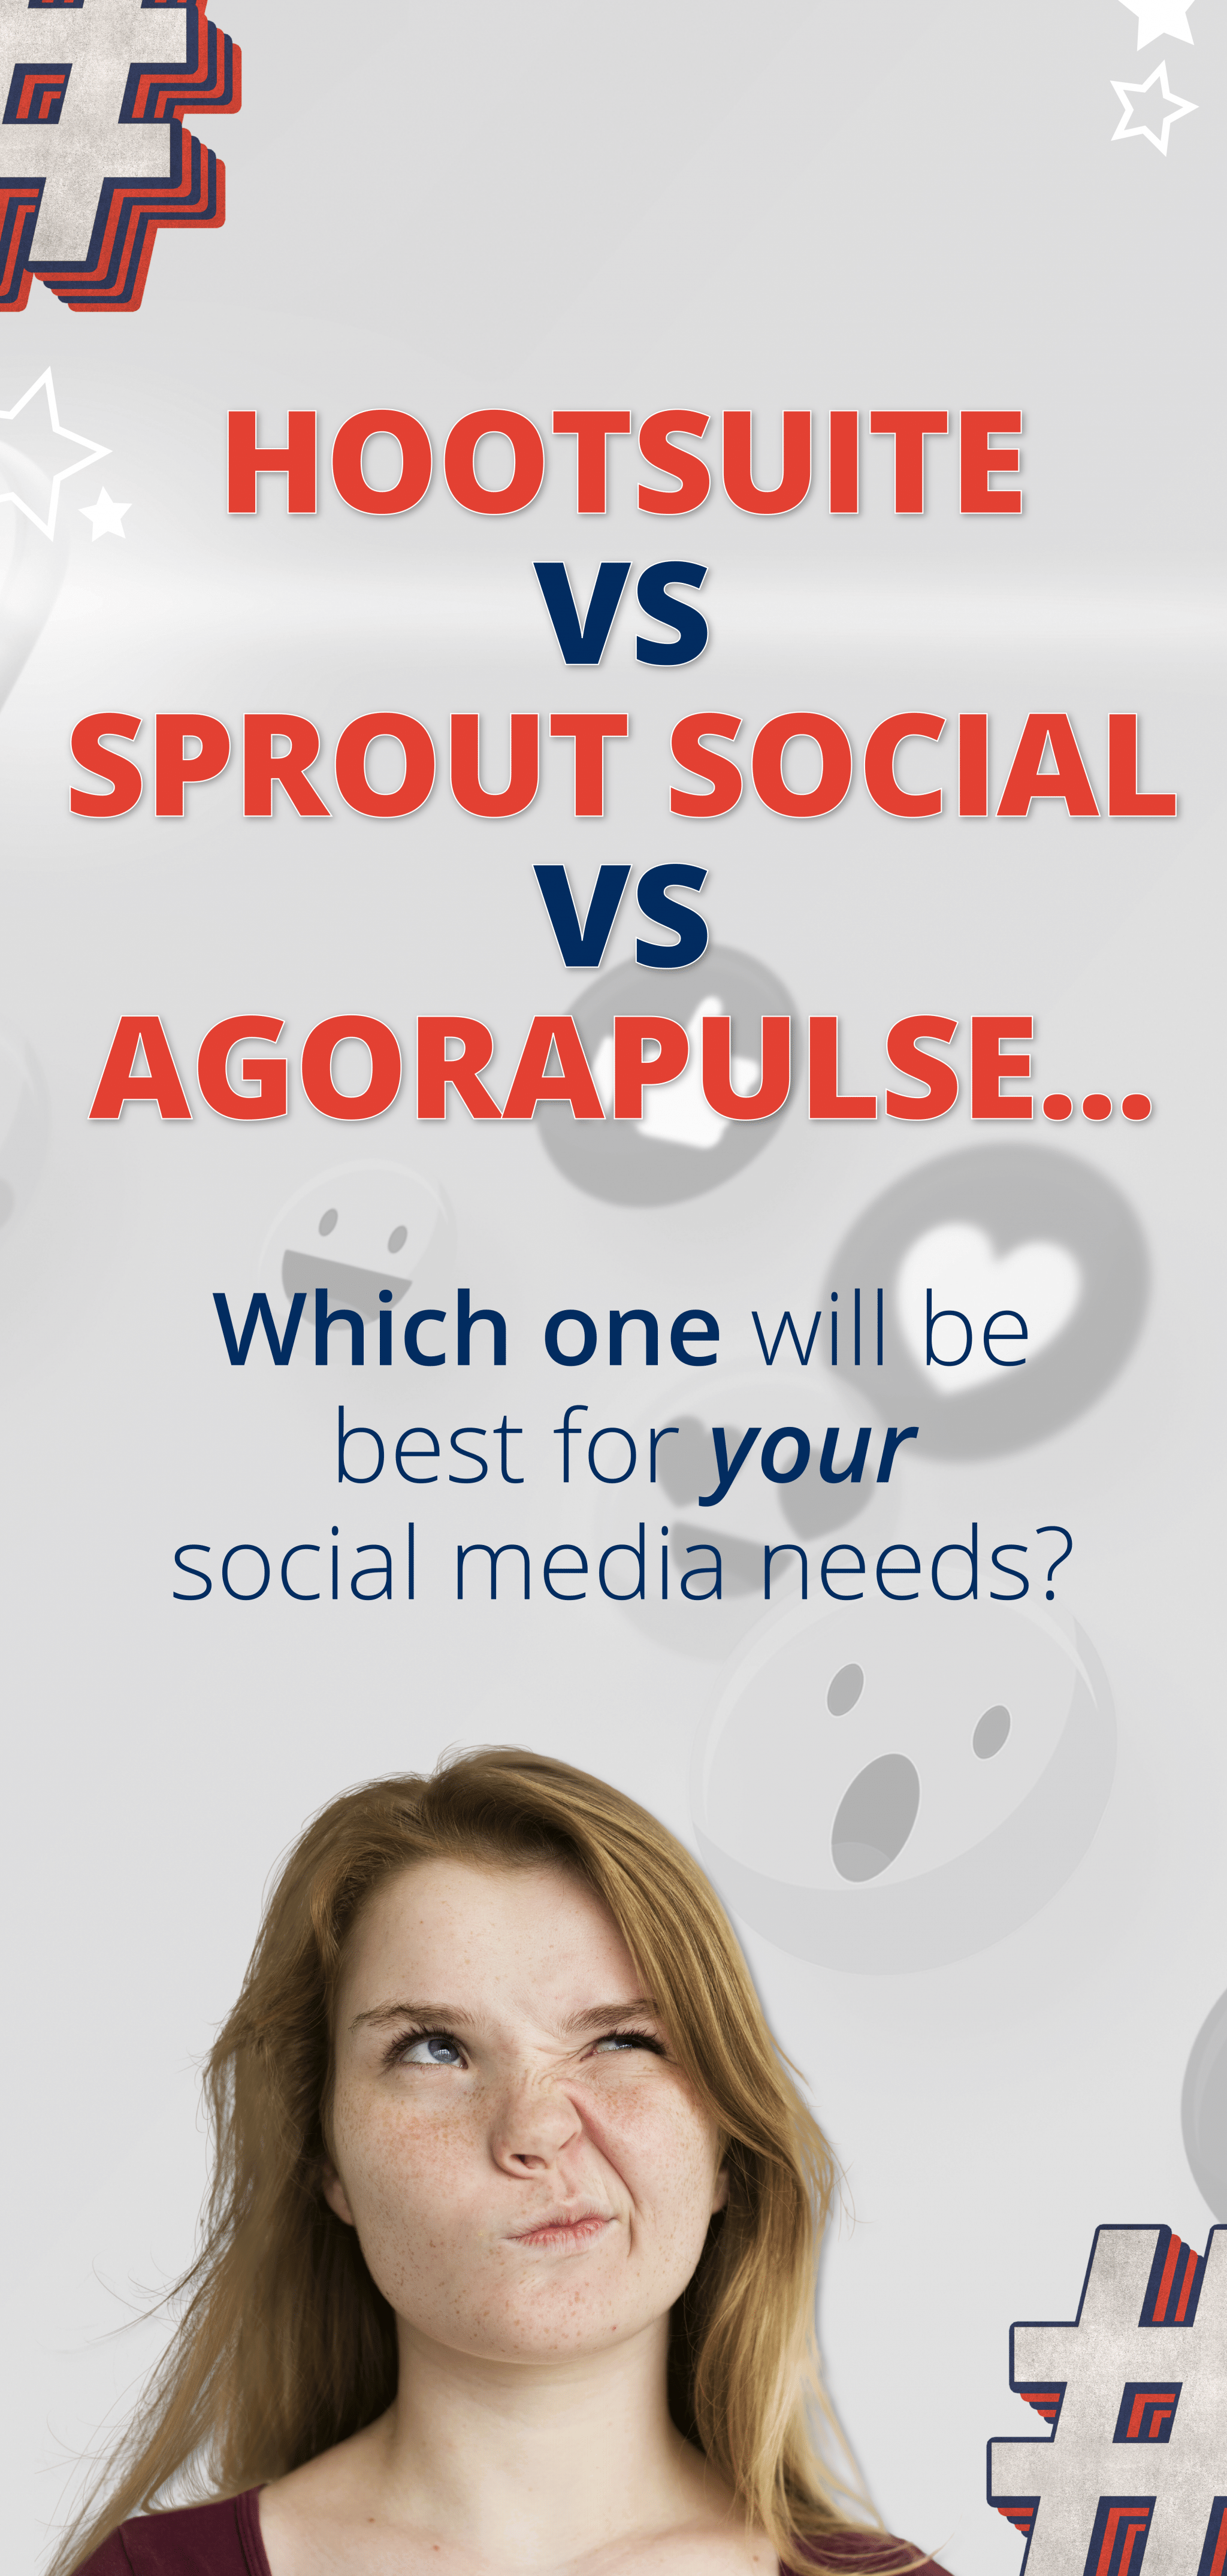 Hootsuite vs Sprout Social vs Agorapulse: Which One Will Be Best for Your Social Media Needs?